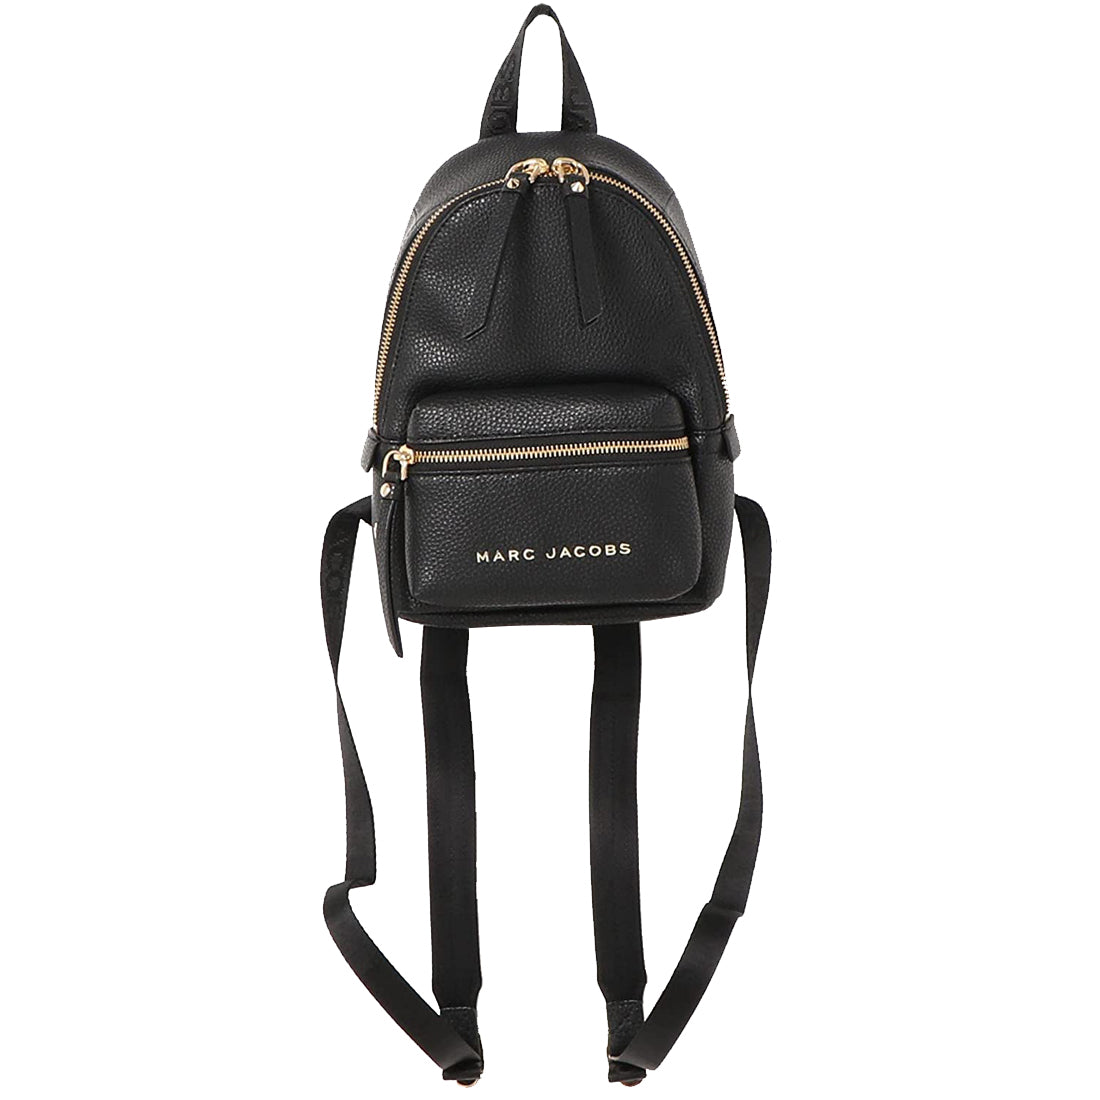 Marc Jacobs Mini Leather Backpack Bag in Black M0016679 – PinkOrchard.com